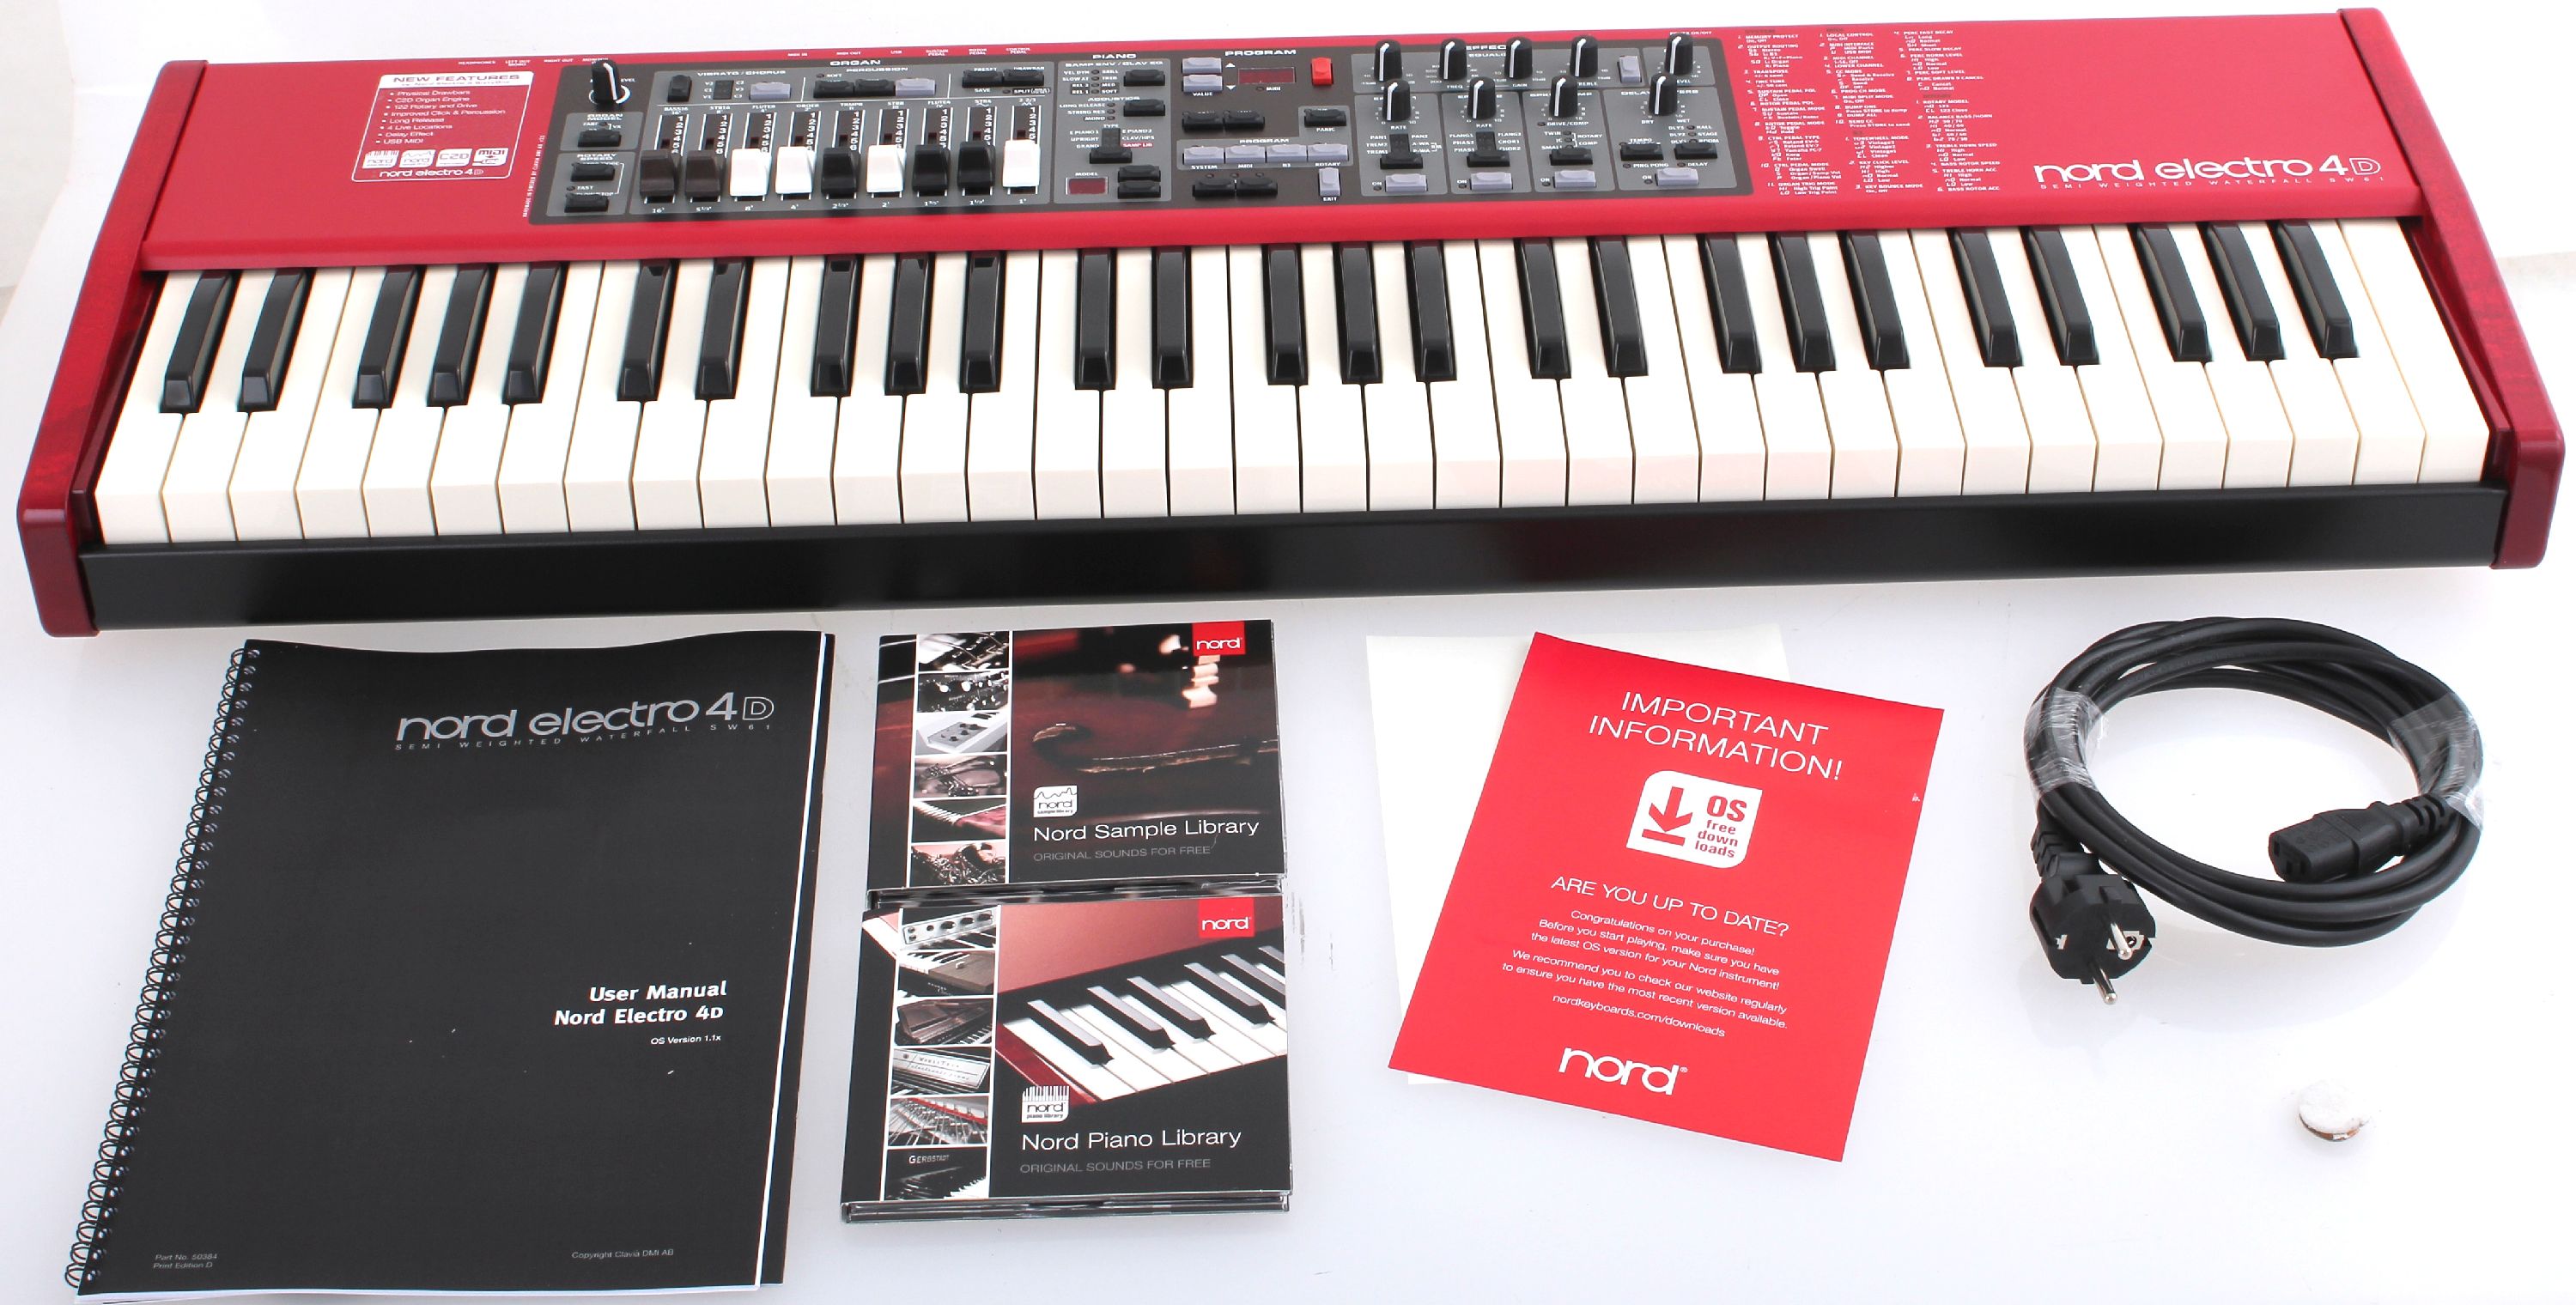 Clavia Nord Electro 4D SW61 B-Ware